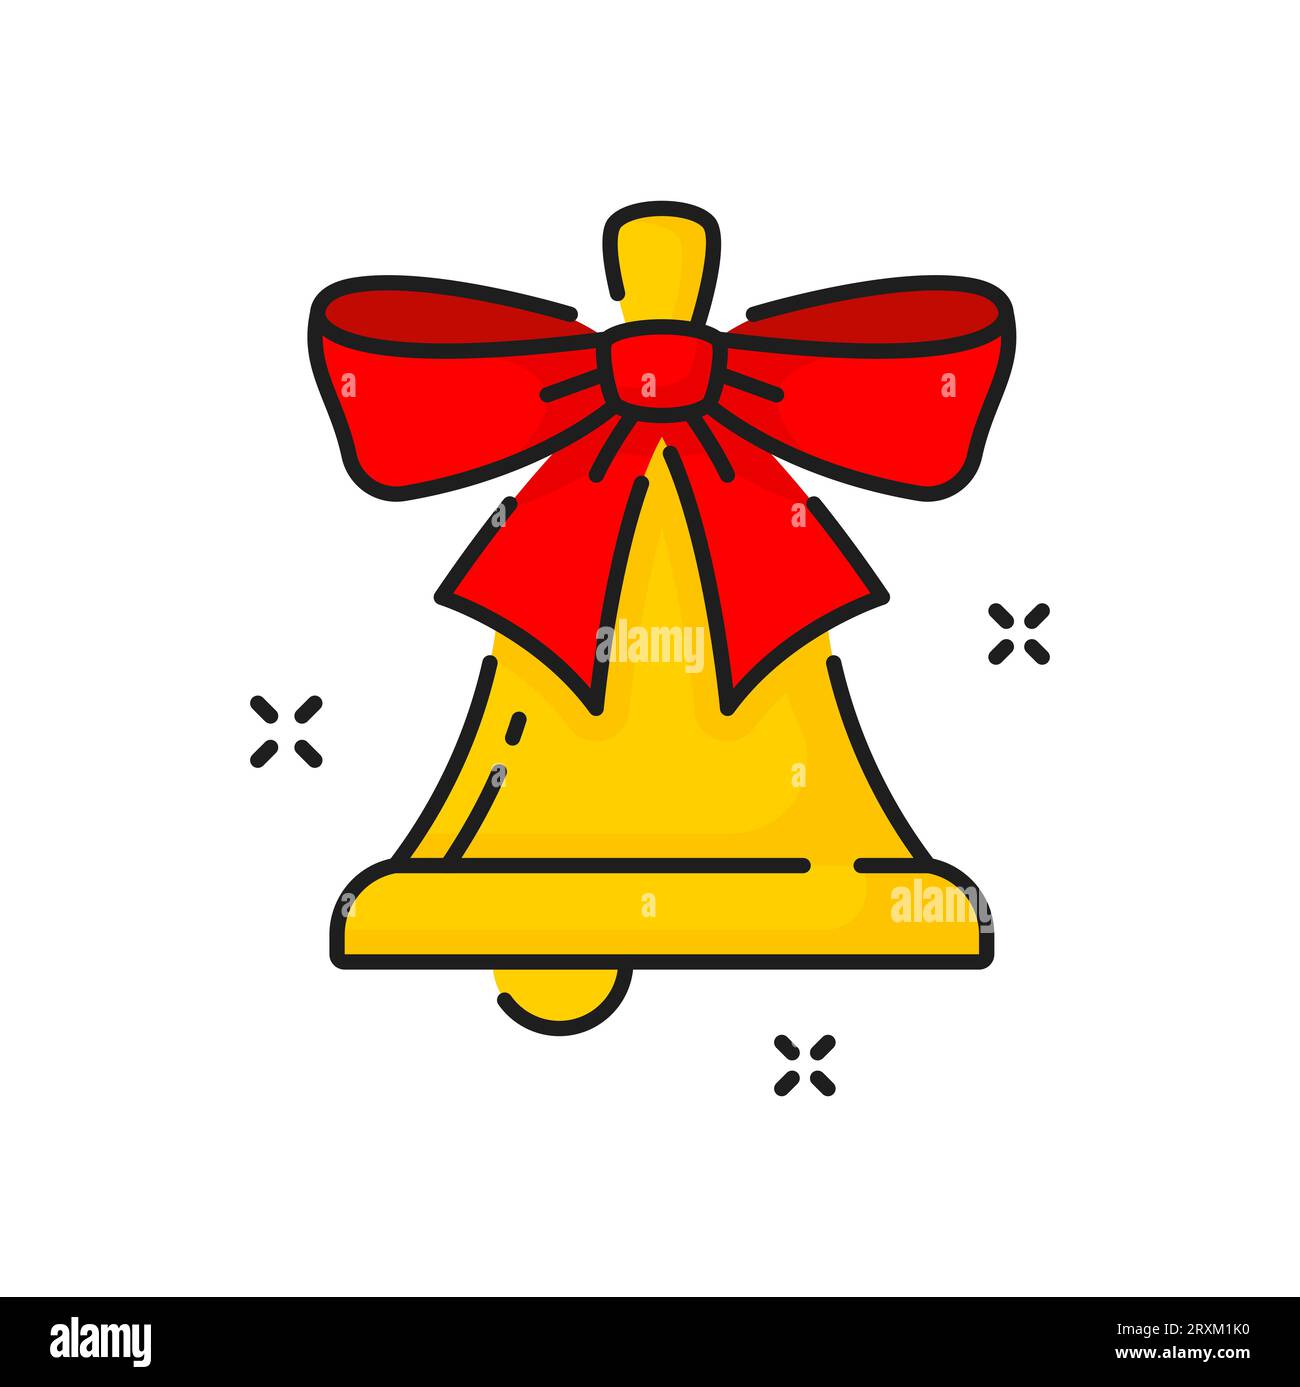 Cute Merry Chrismas greeting card with golden bells and bow. Square vector  illustration of two outline jingle bells. Composition of Christmas symbol  and vintage text 11776881 Vector Art at Vecteezy